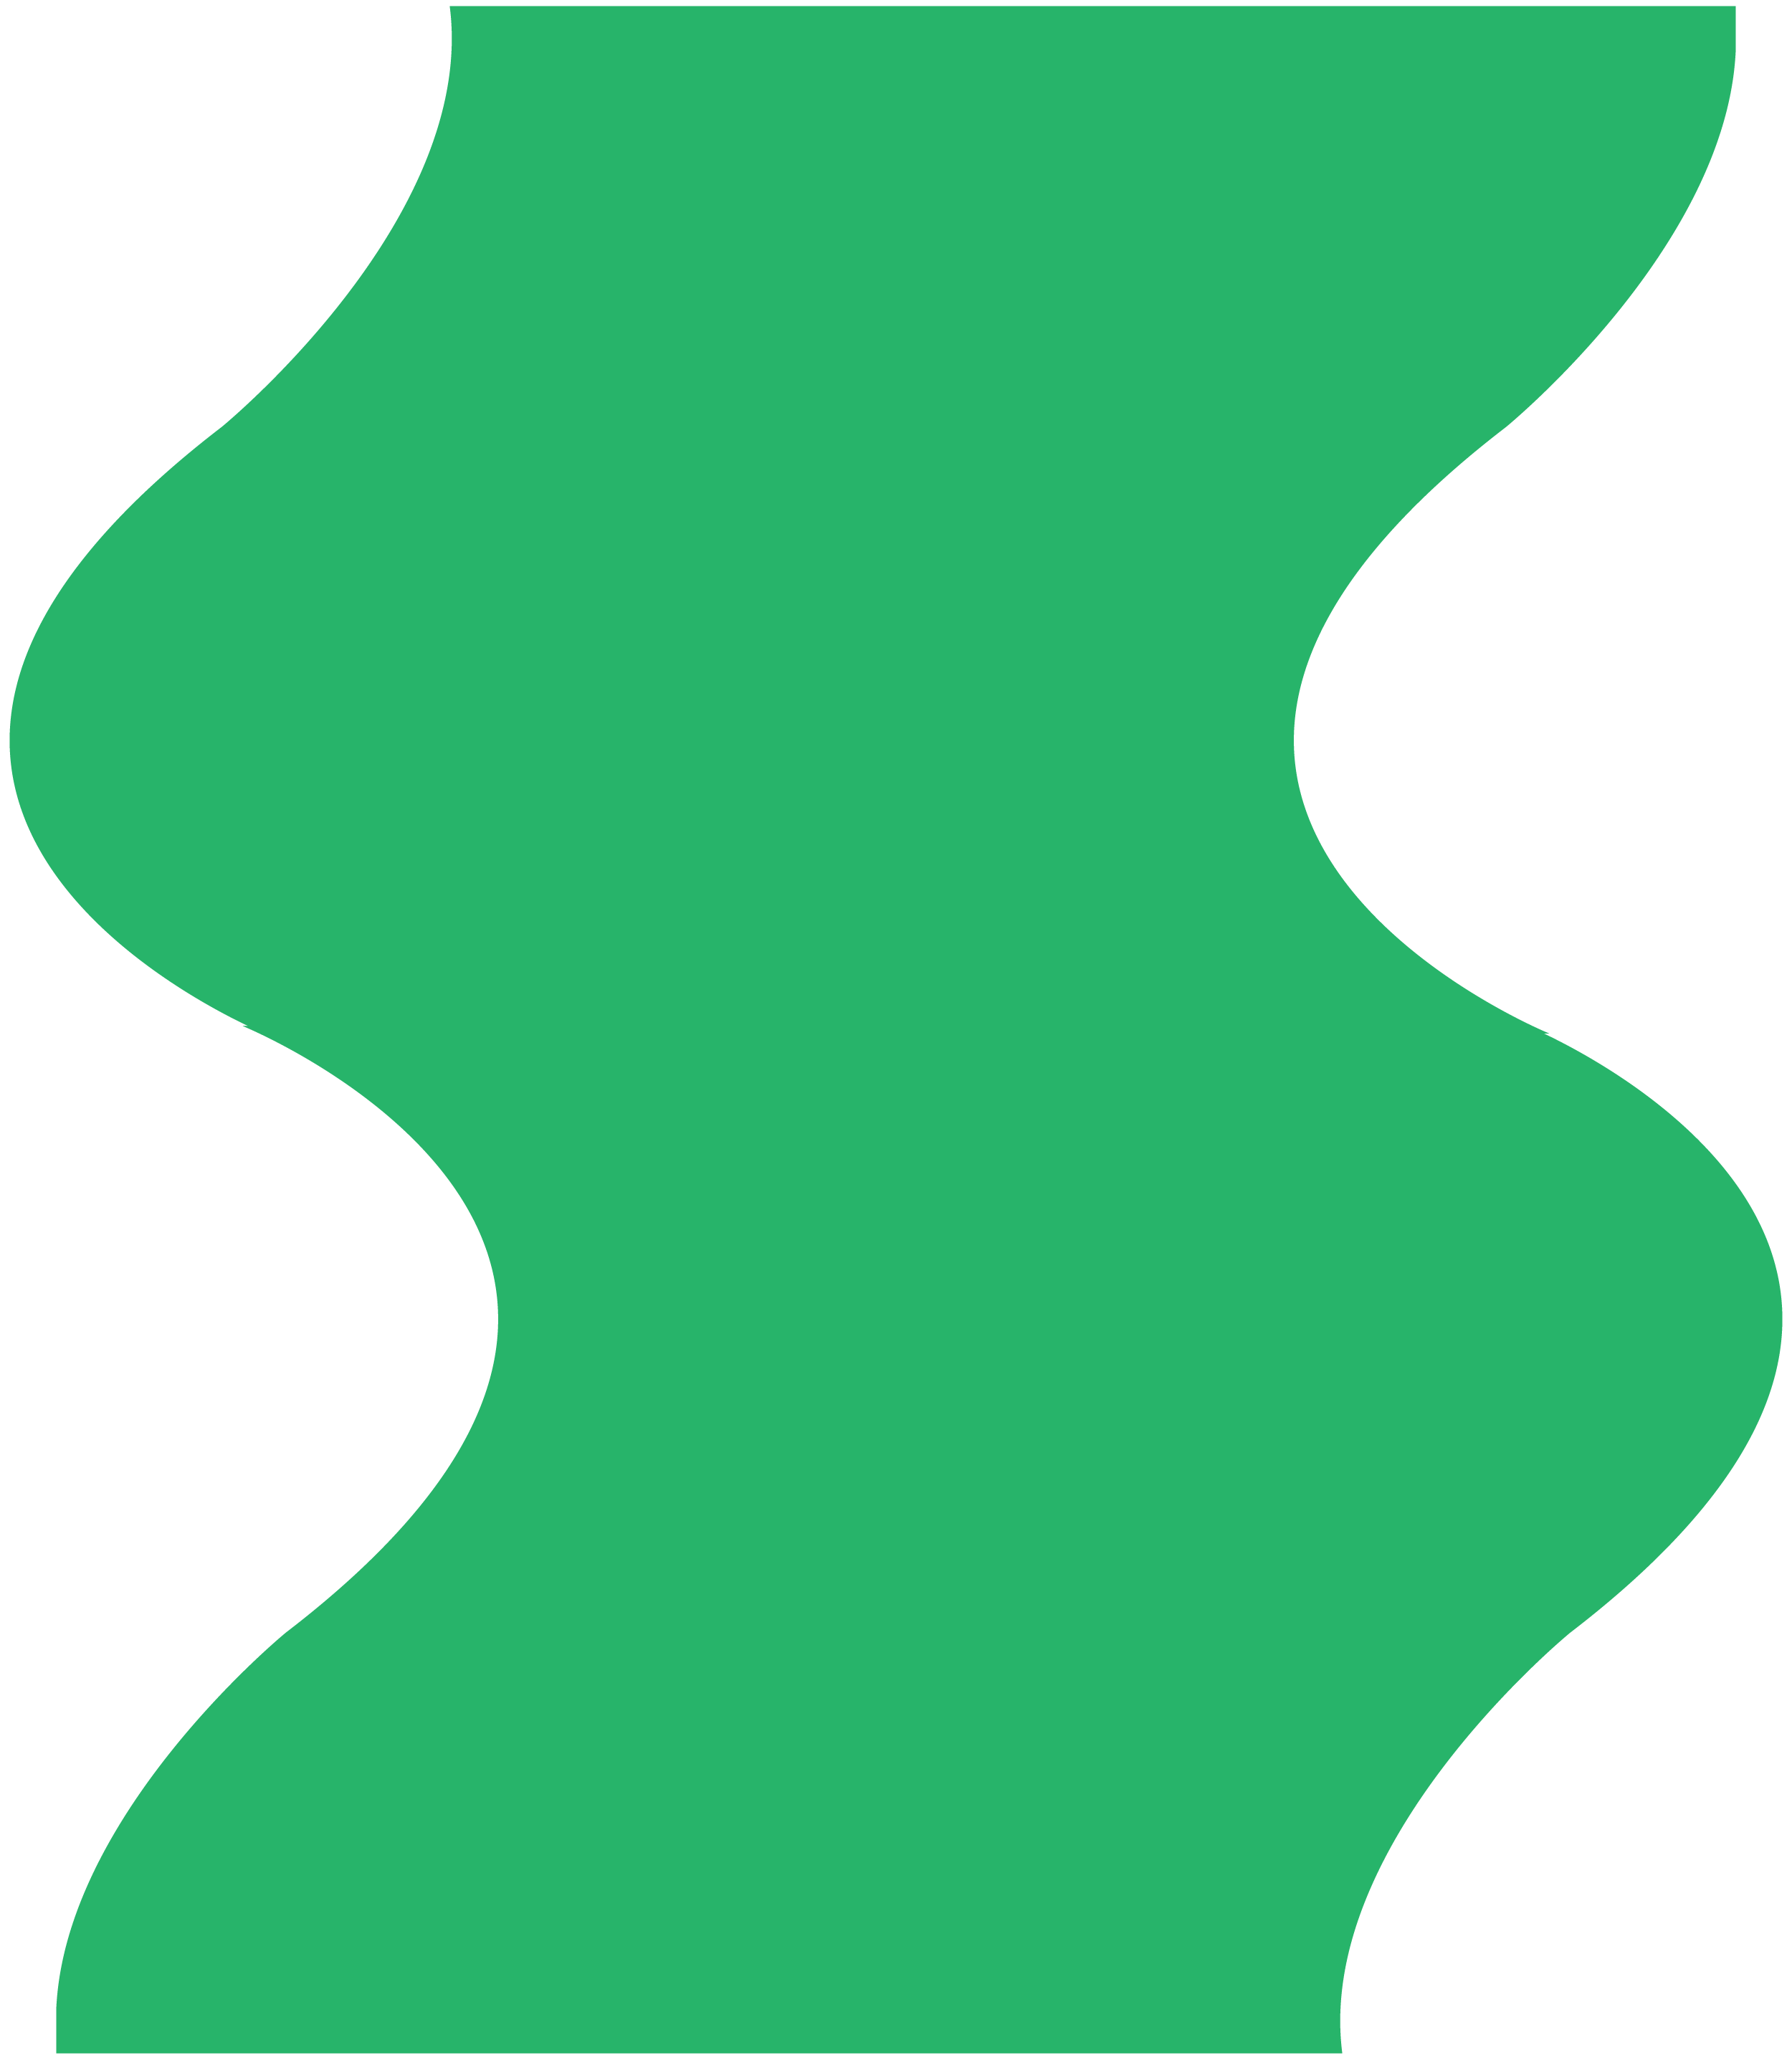 Green wave icon